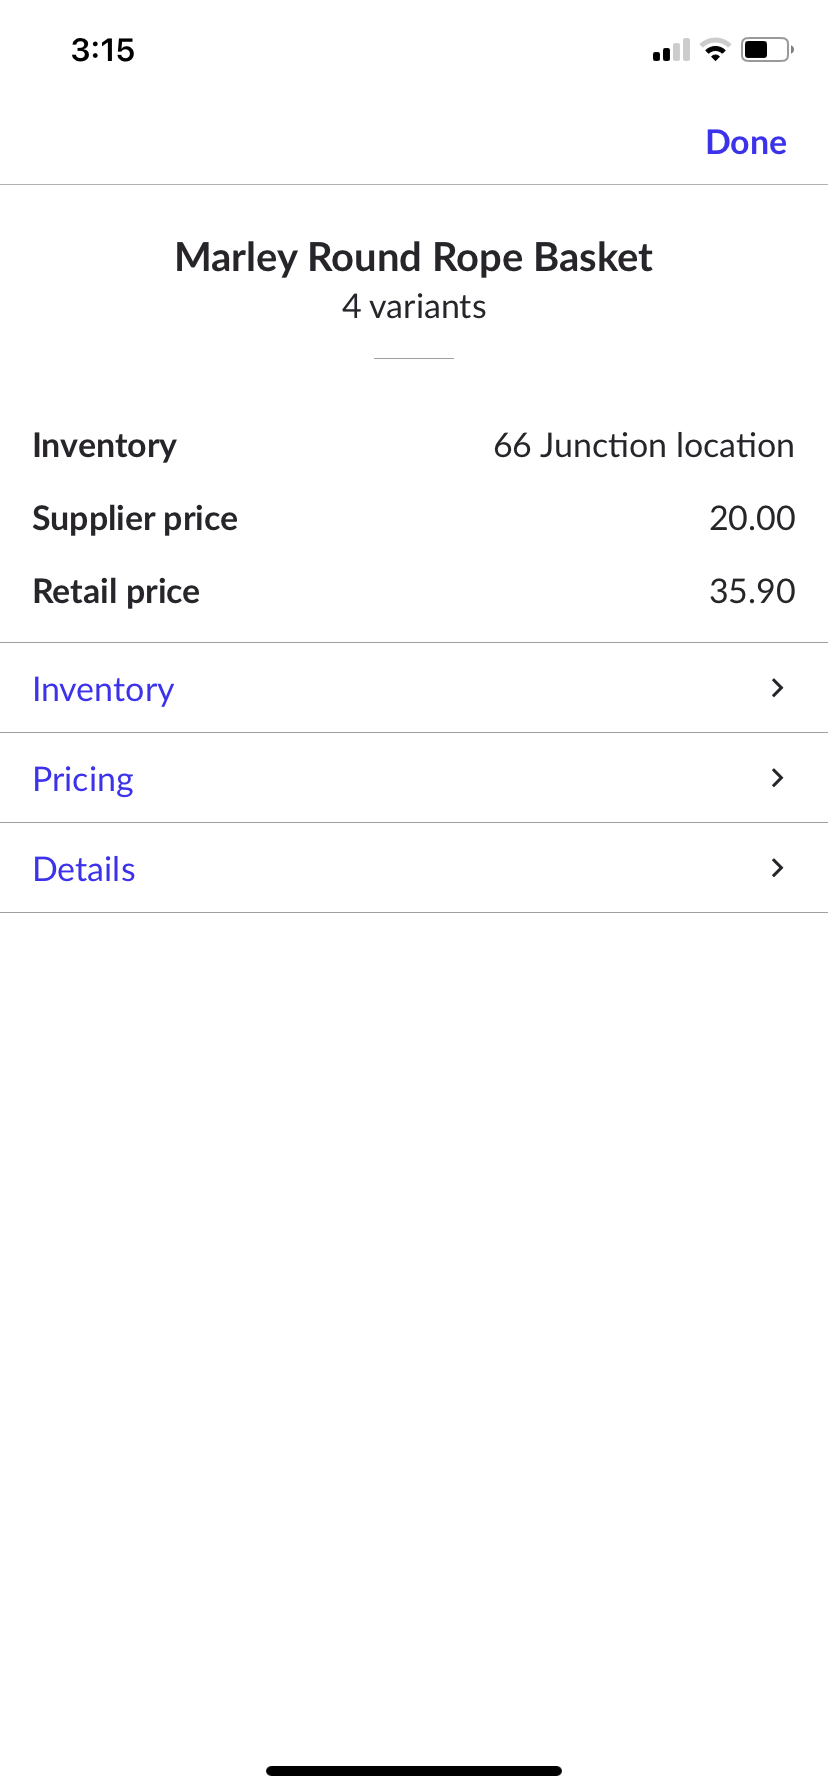 Item main page with drop down menus for product information